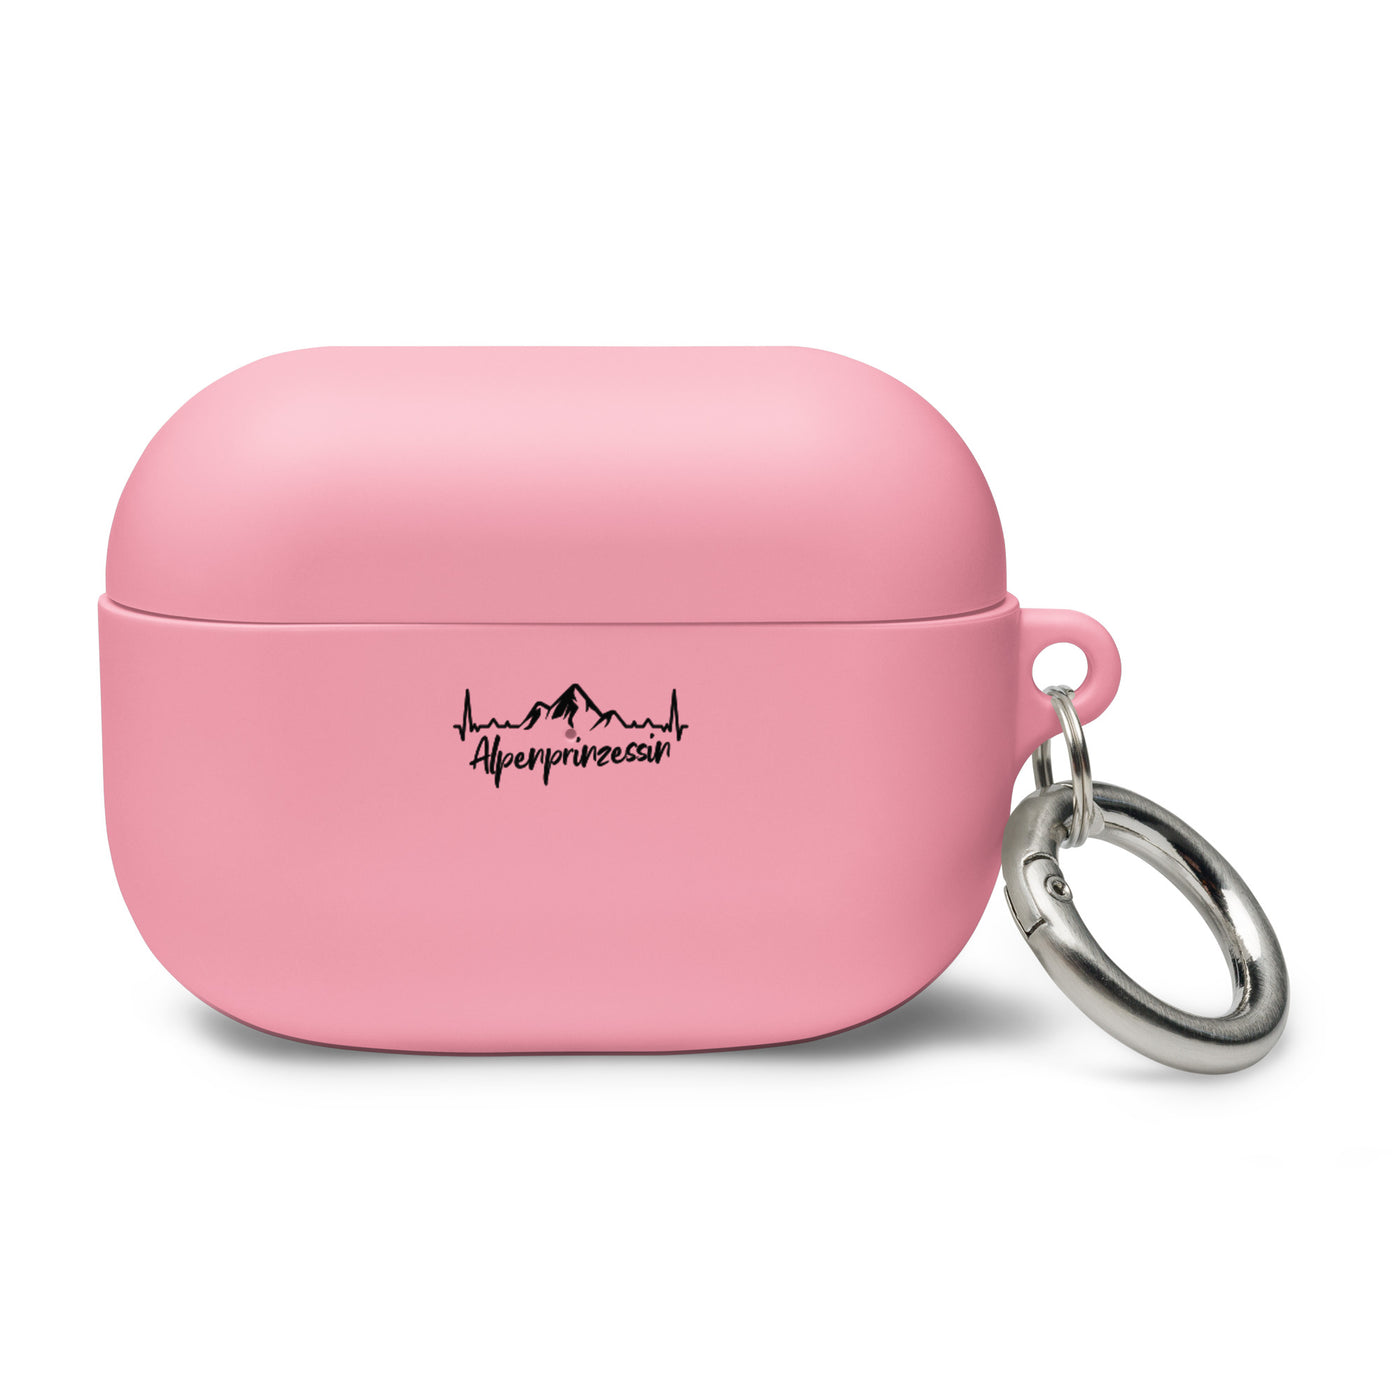 Alpenprinzessin 1 - AirPods Case berge Pink AirPods Pro